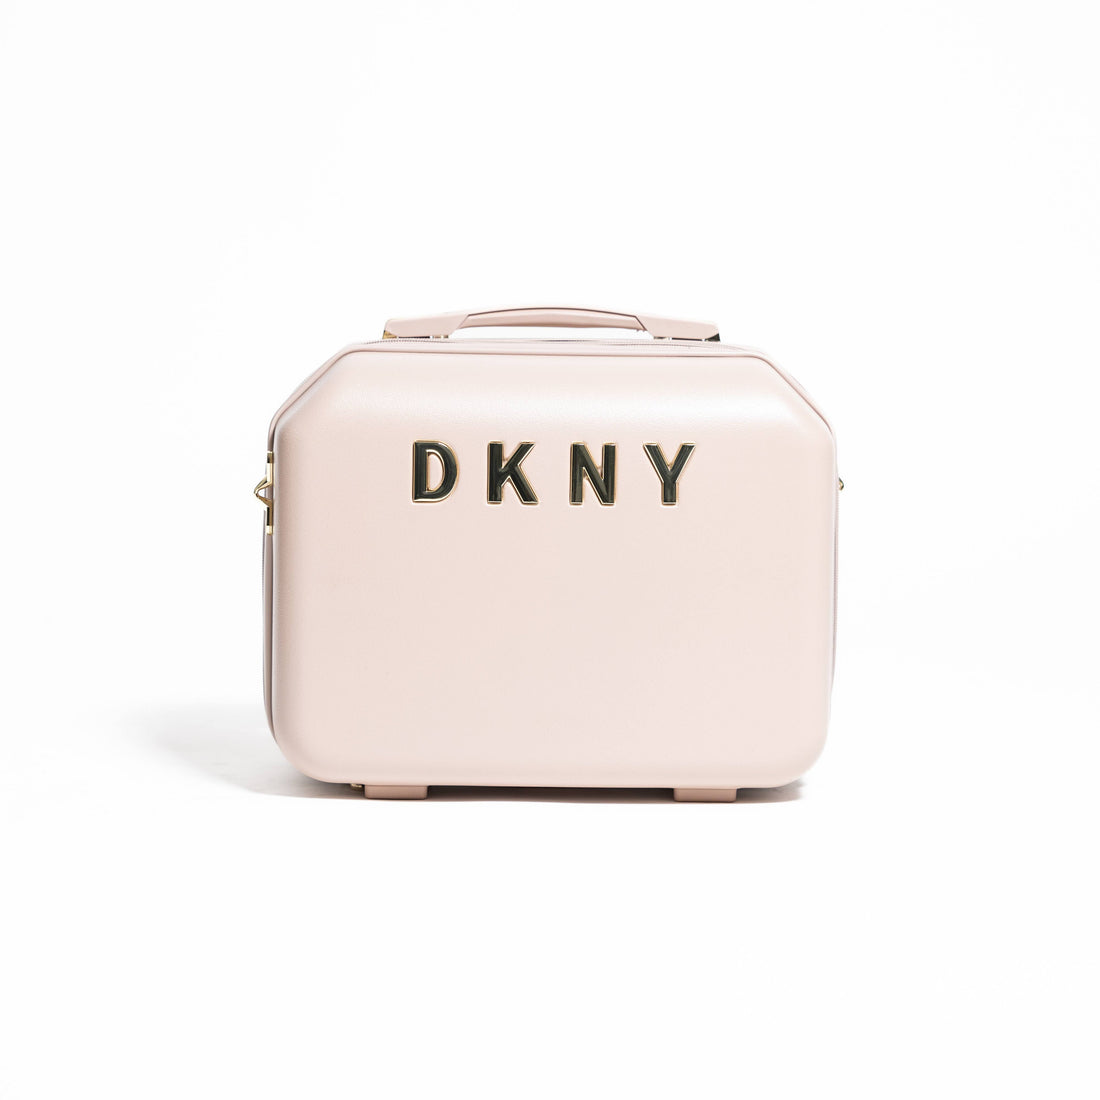 DKNY Champagne Beauty case_DH060ML0_CHP_01